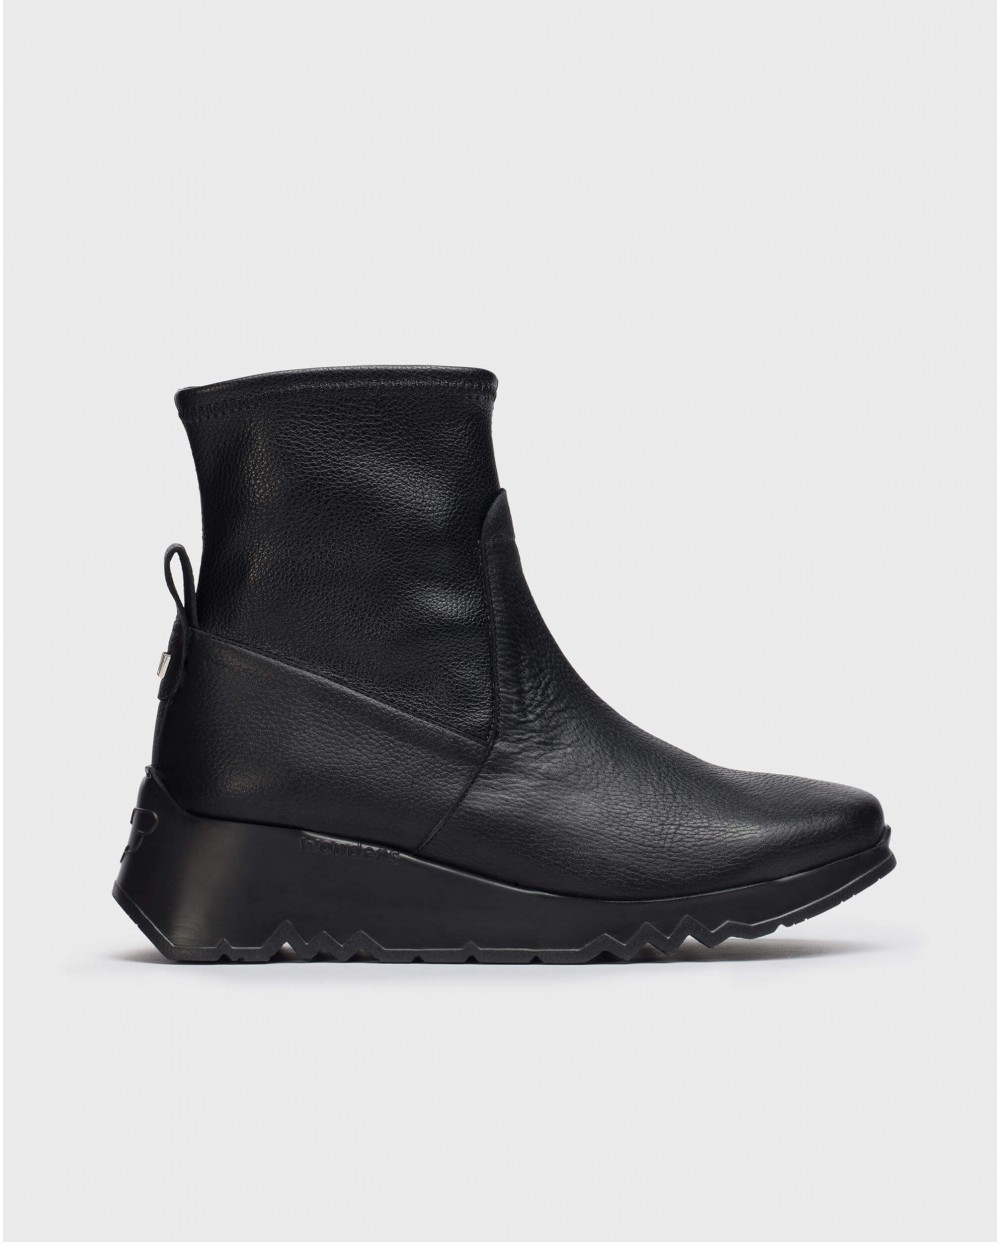 Wonders-Ankle Boots-Black Tazu Ankle Boot